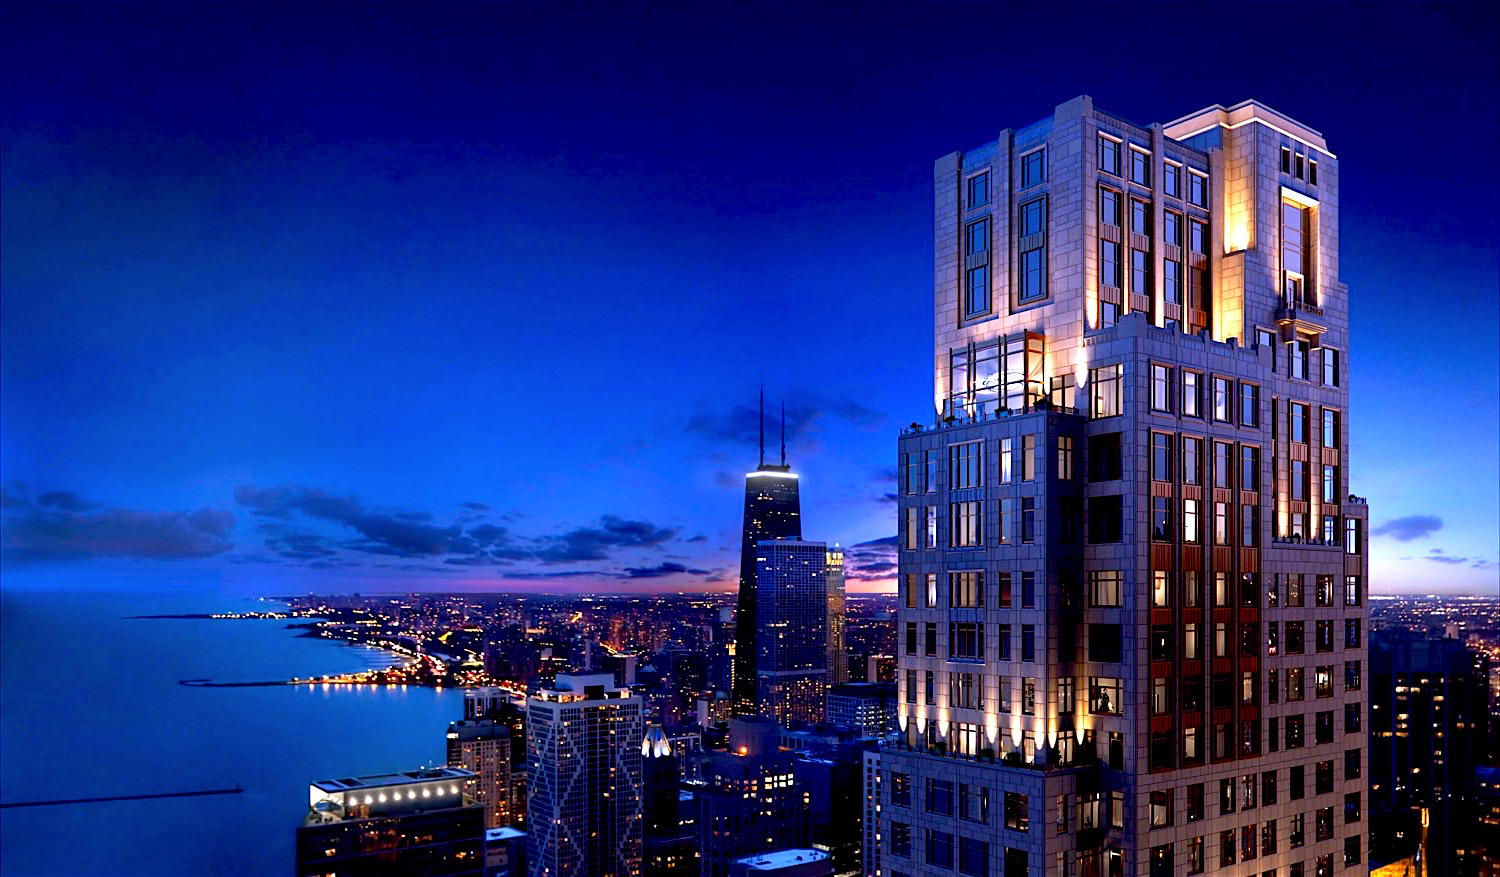 Looking for luxury apartments and condos near Streeterville?